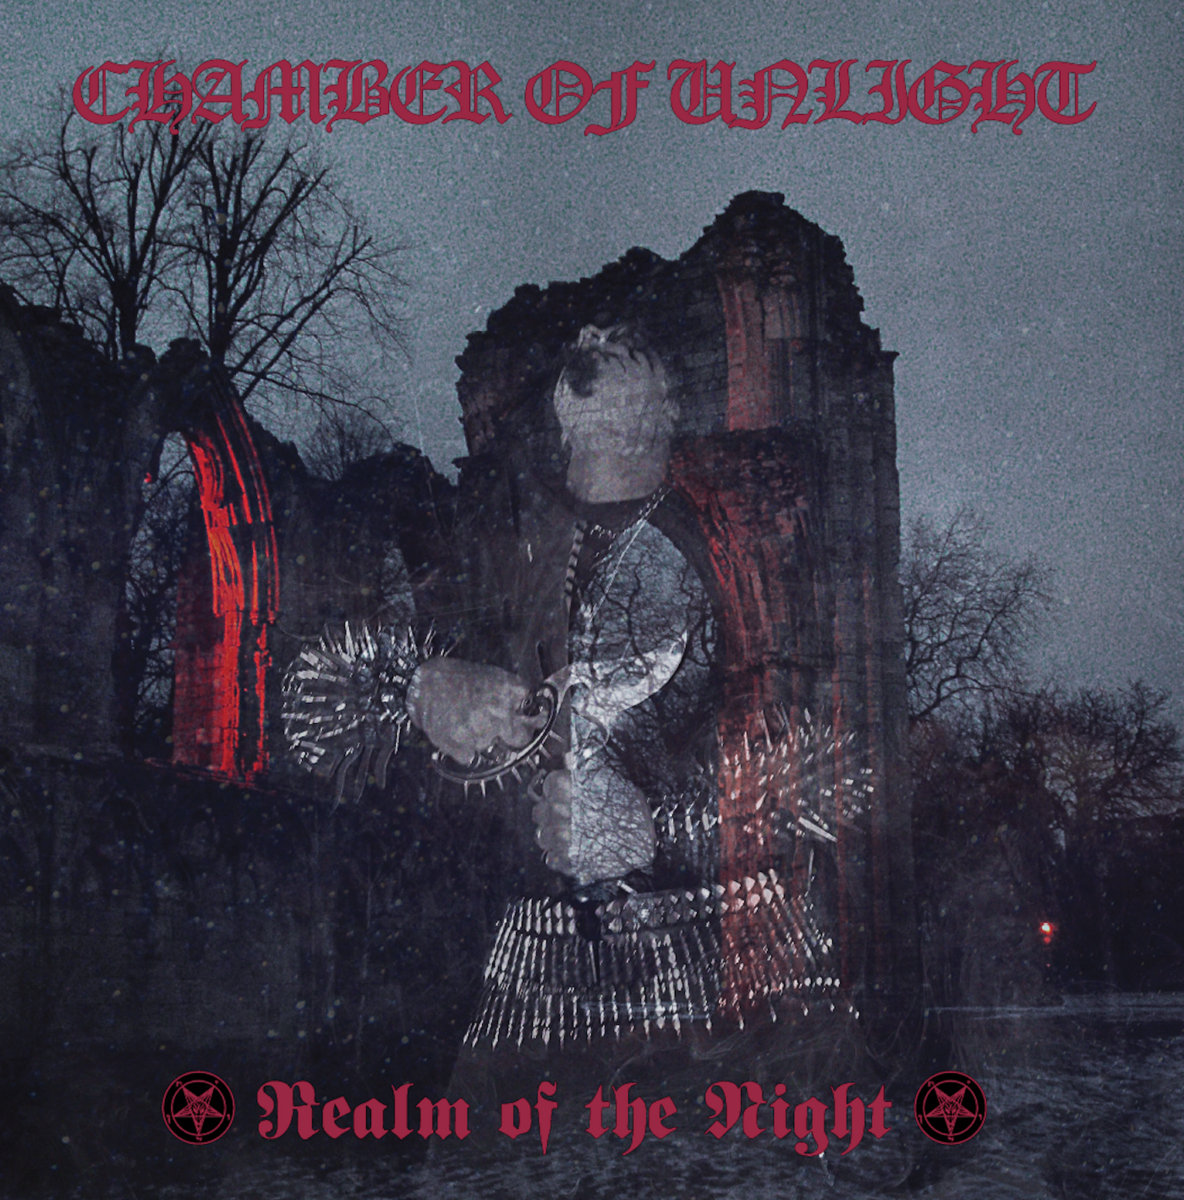 chamber of unlight – realm of the night